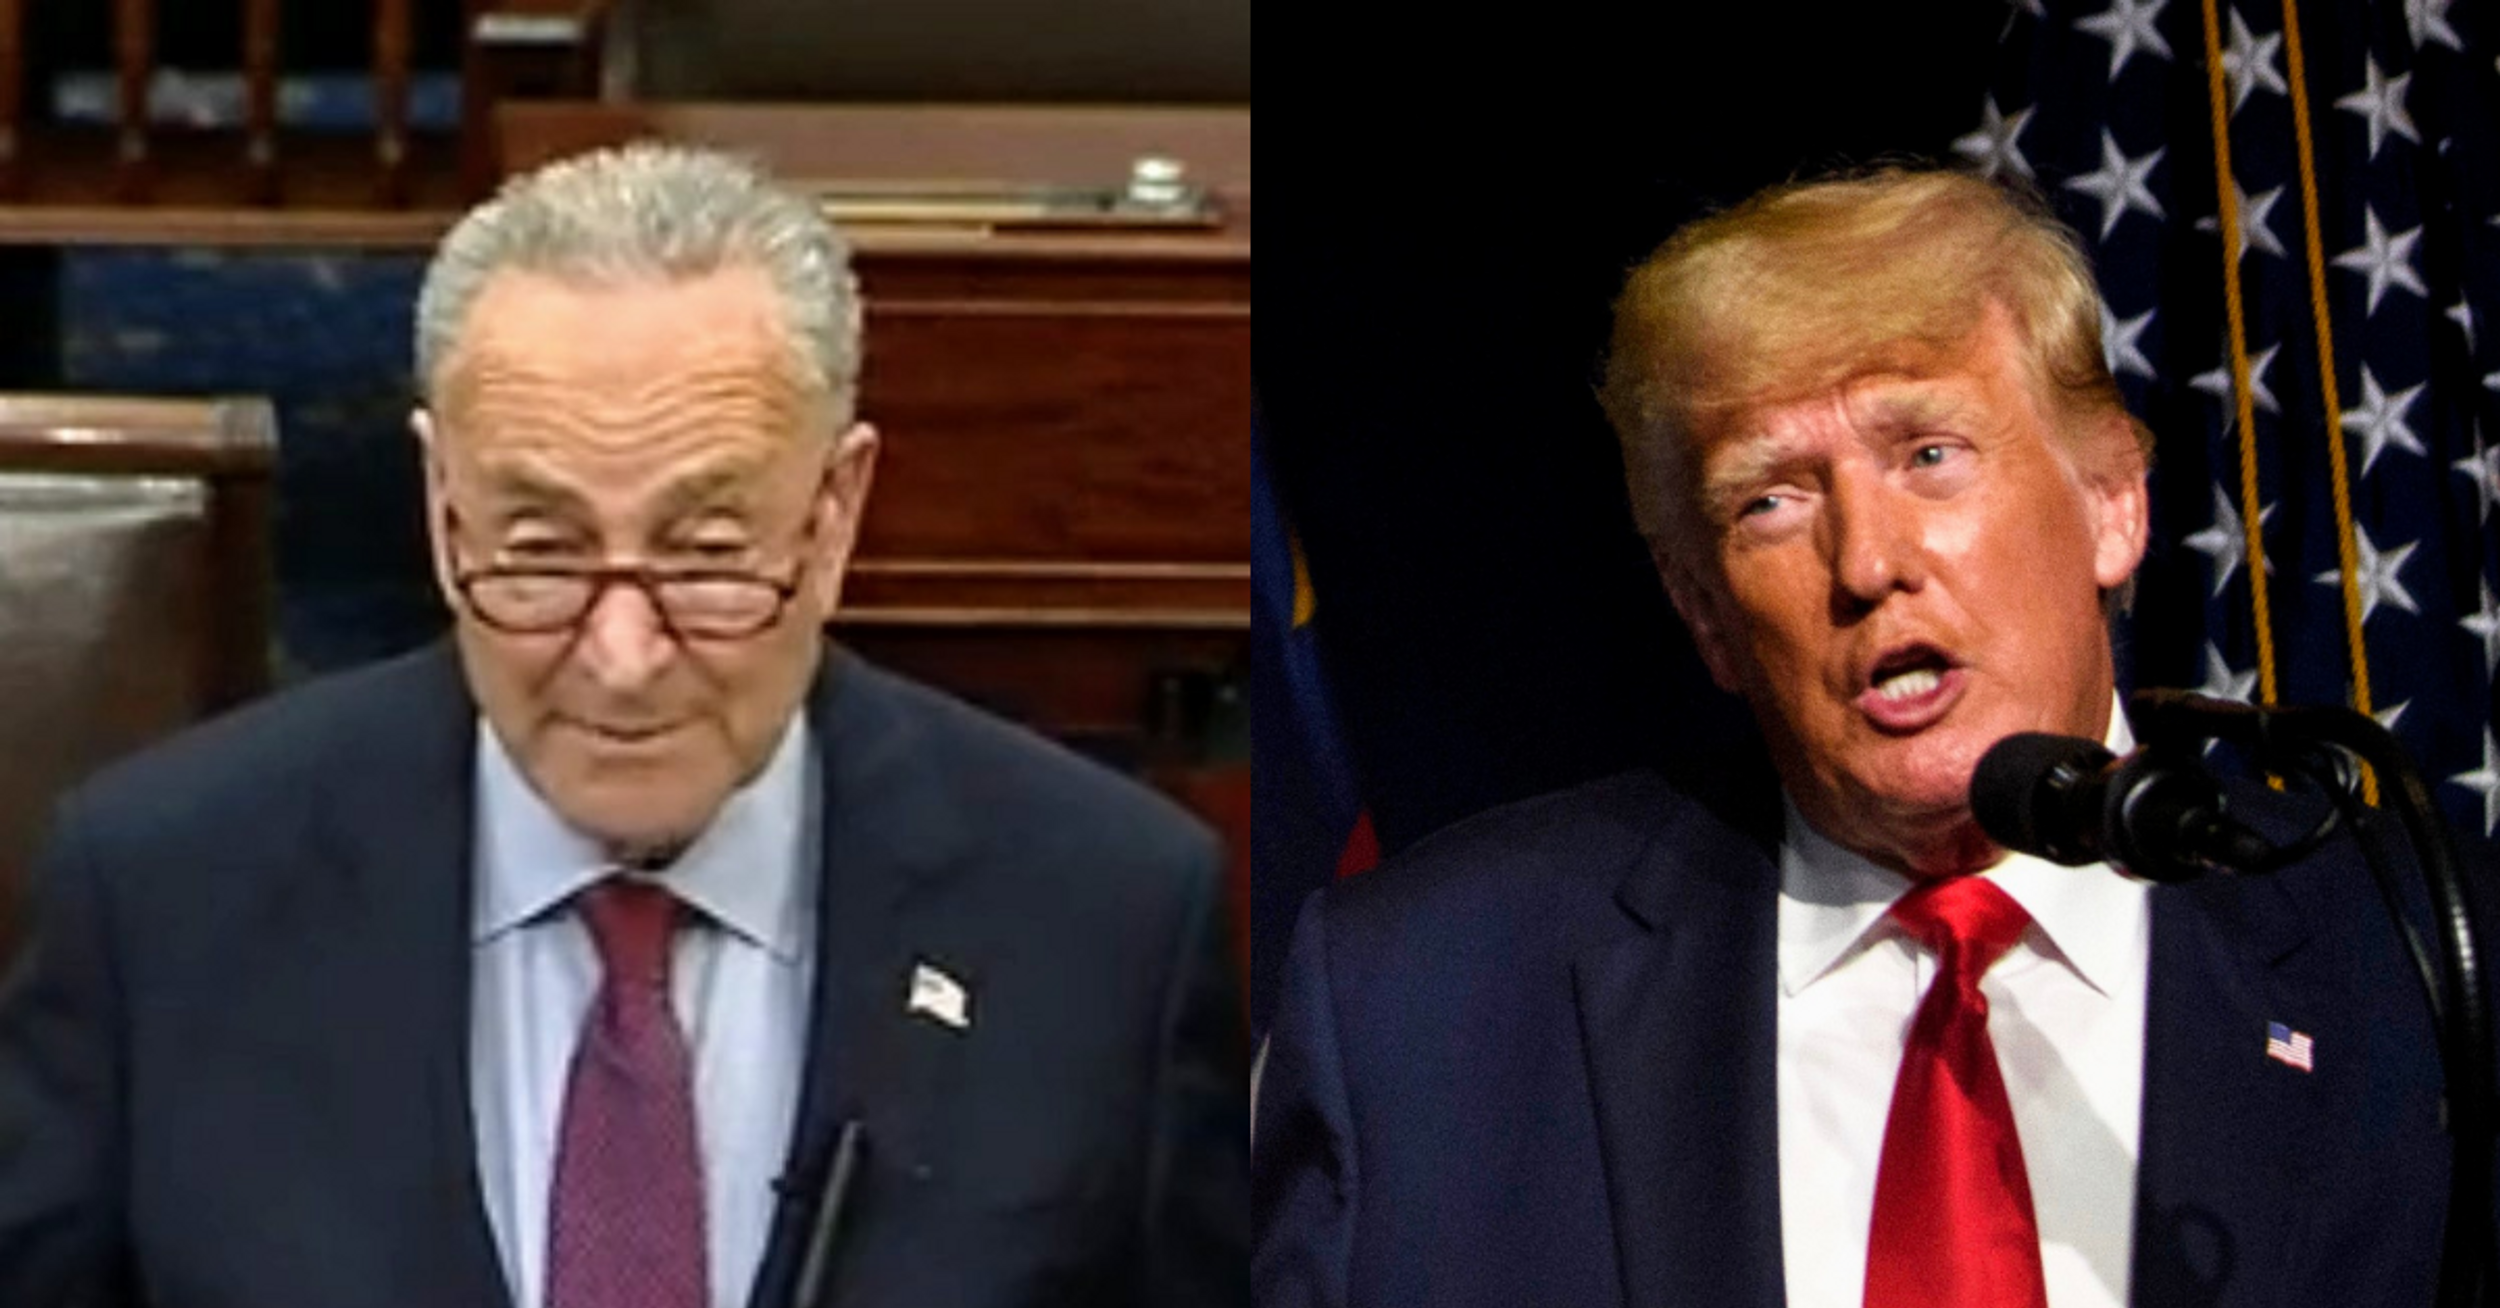 Schumer Blasts 'Despicable' Trump In Fiery Senate Floor Rant Calling Out GOP's Voter Suppression​